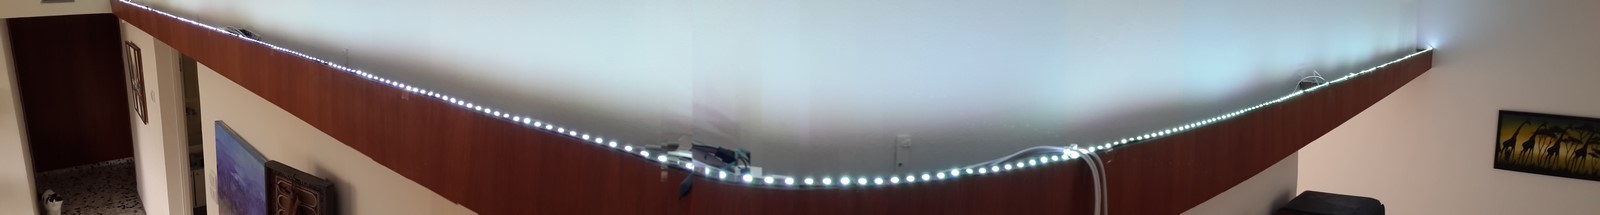 Led strip panorama picture